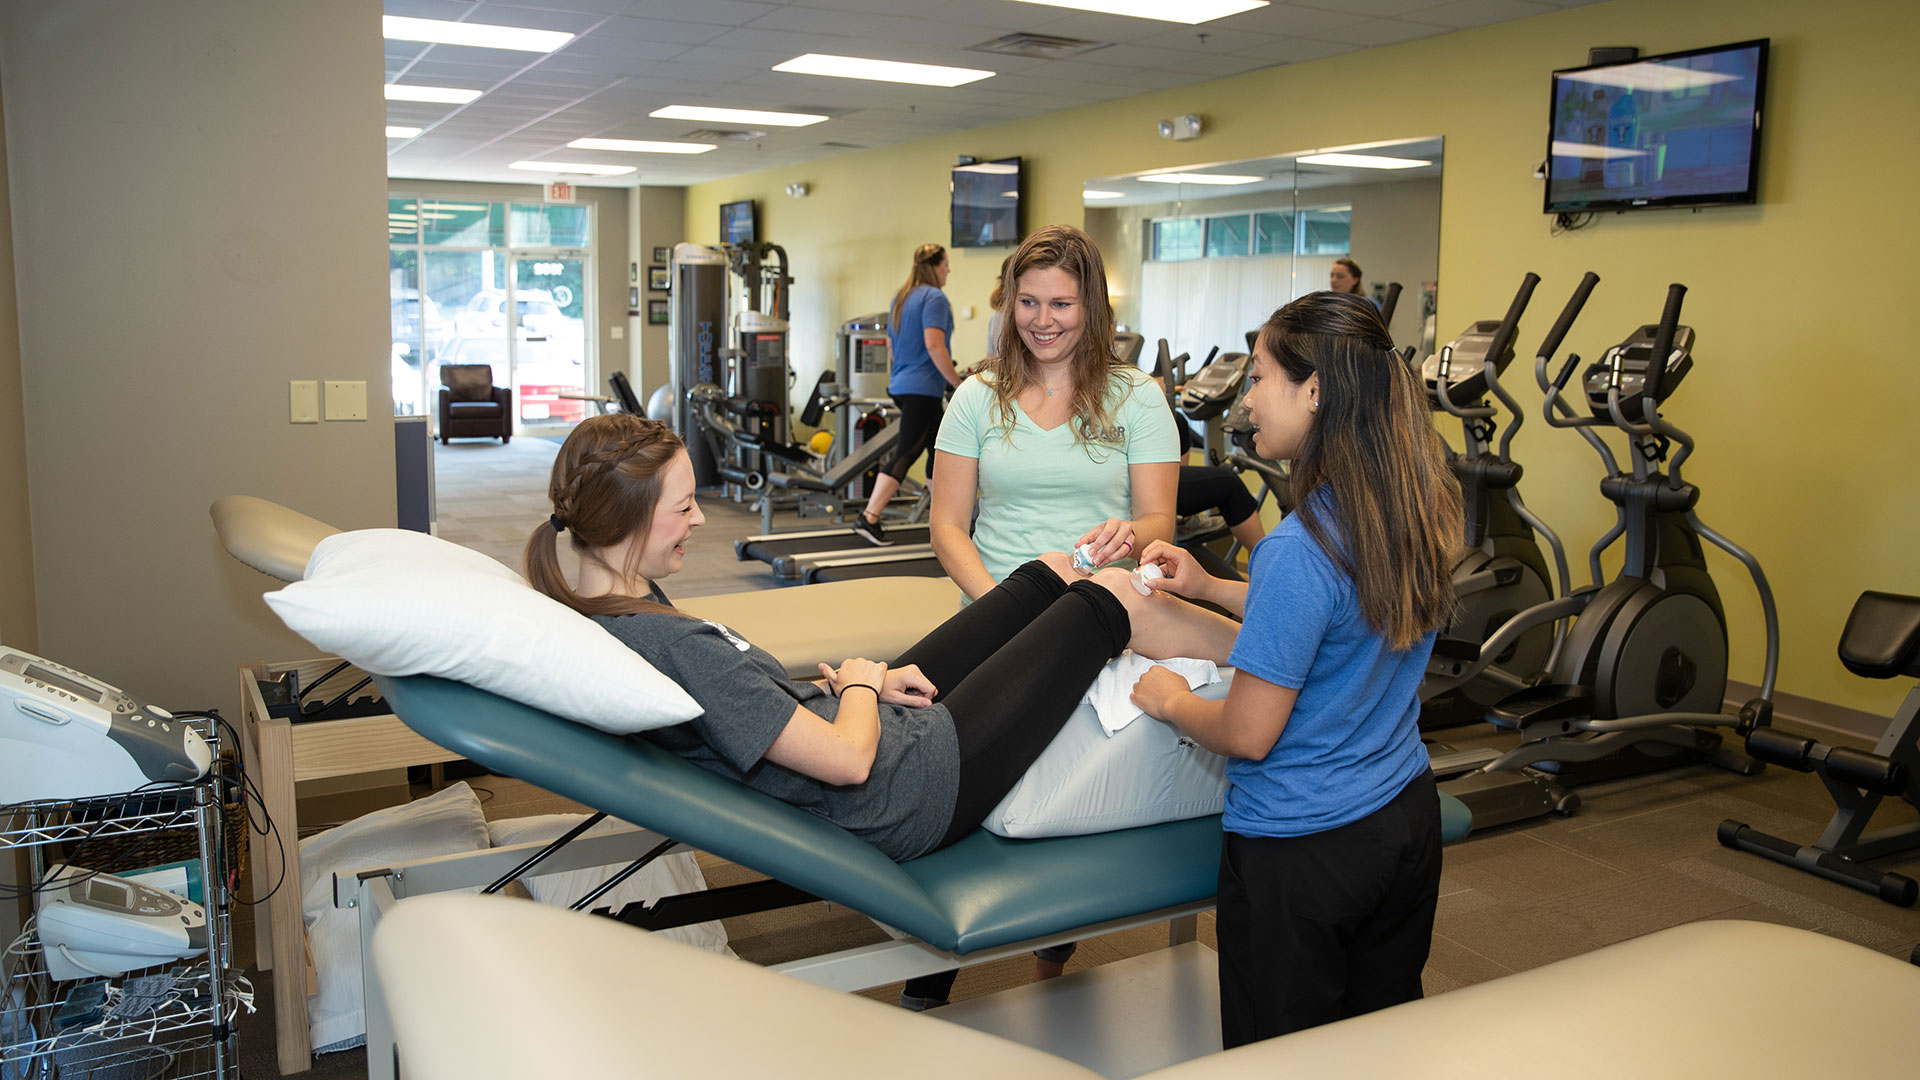 Two physical therapy students treat a person's injured knees with ice.